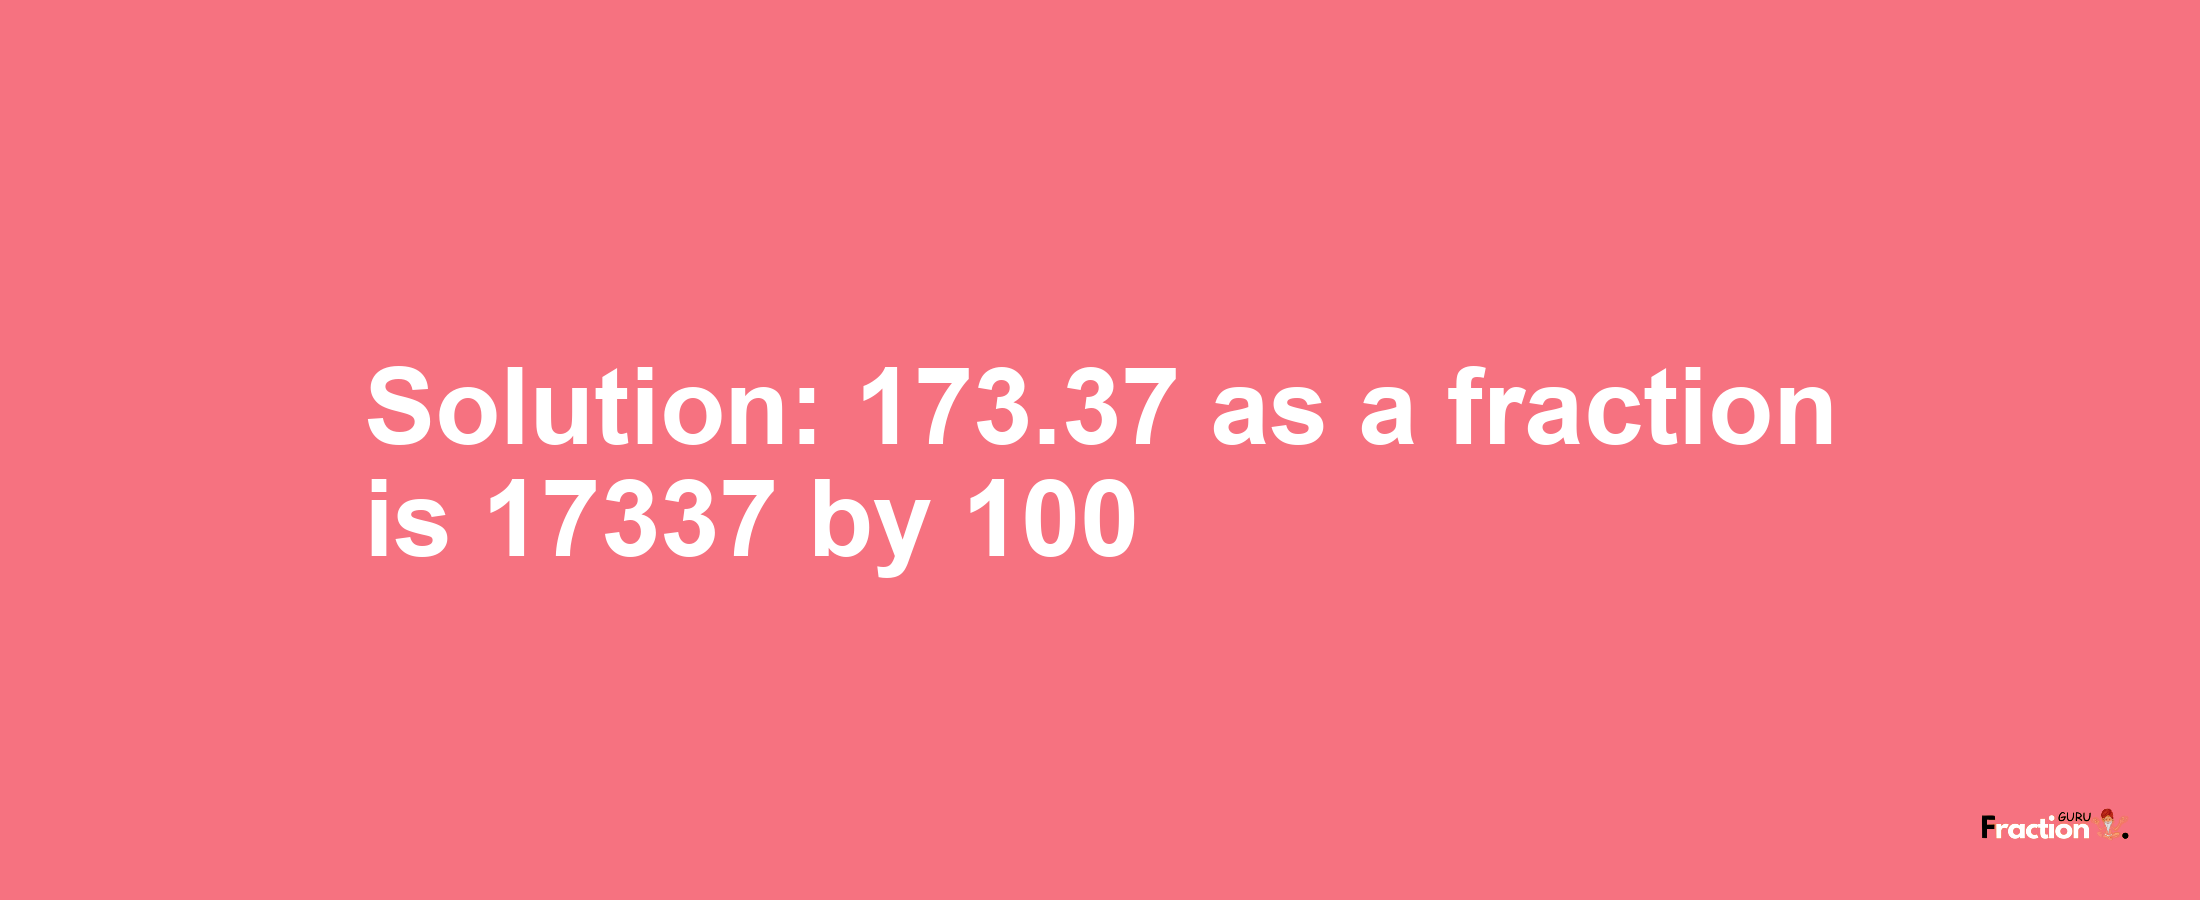 Solution:173.37 as a fraction is 17337/100